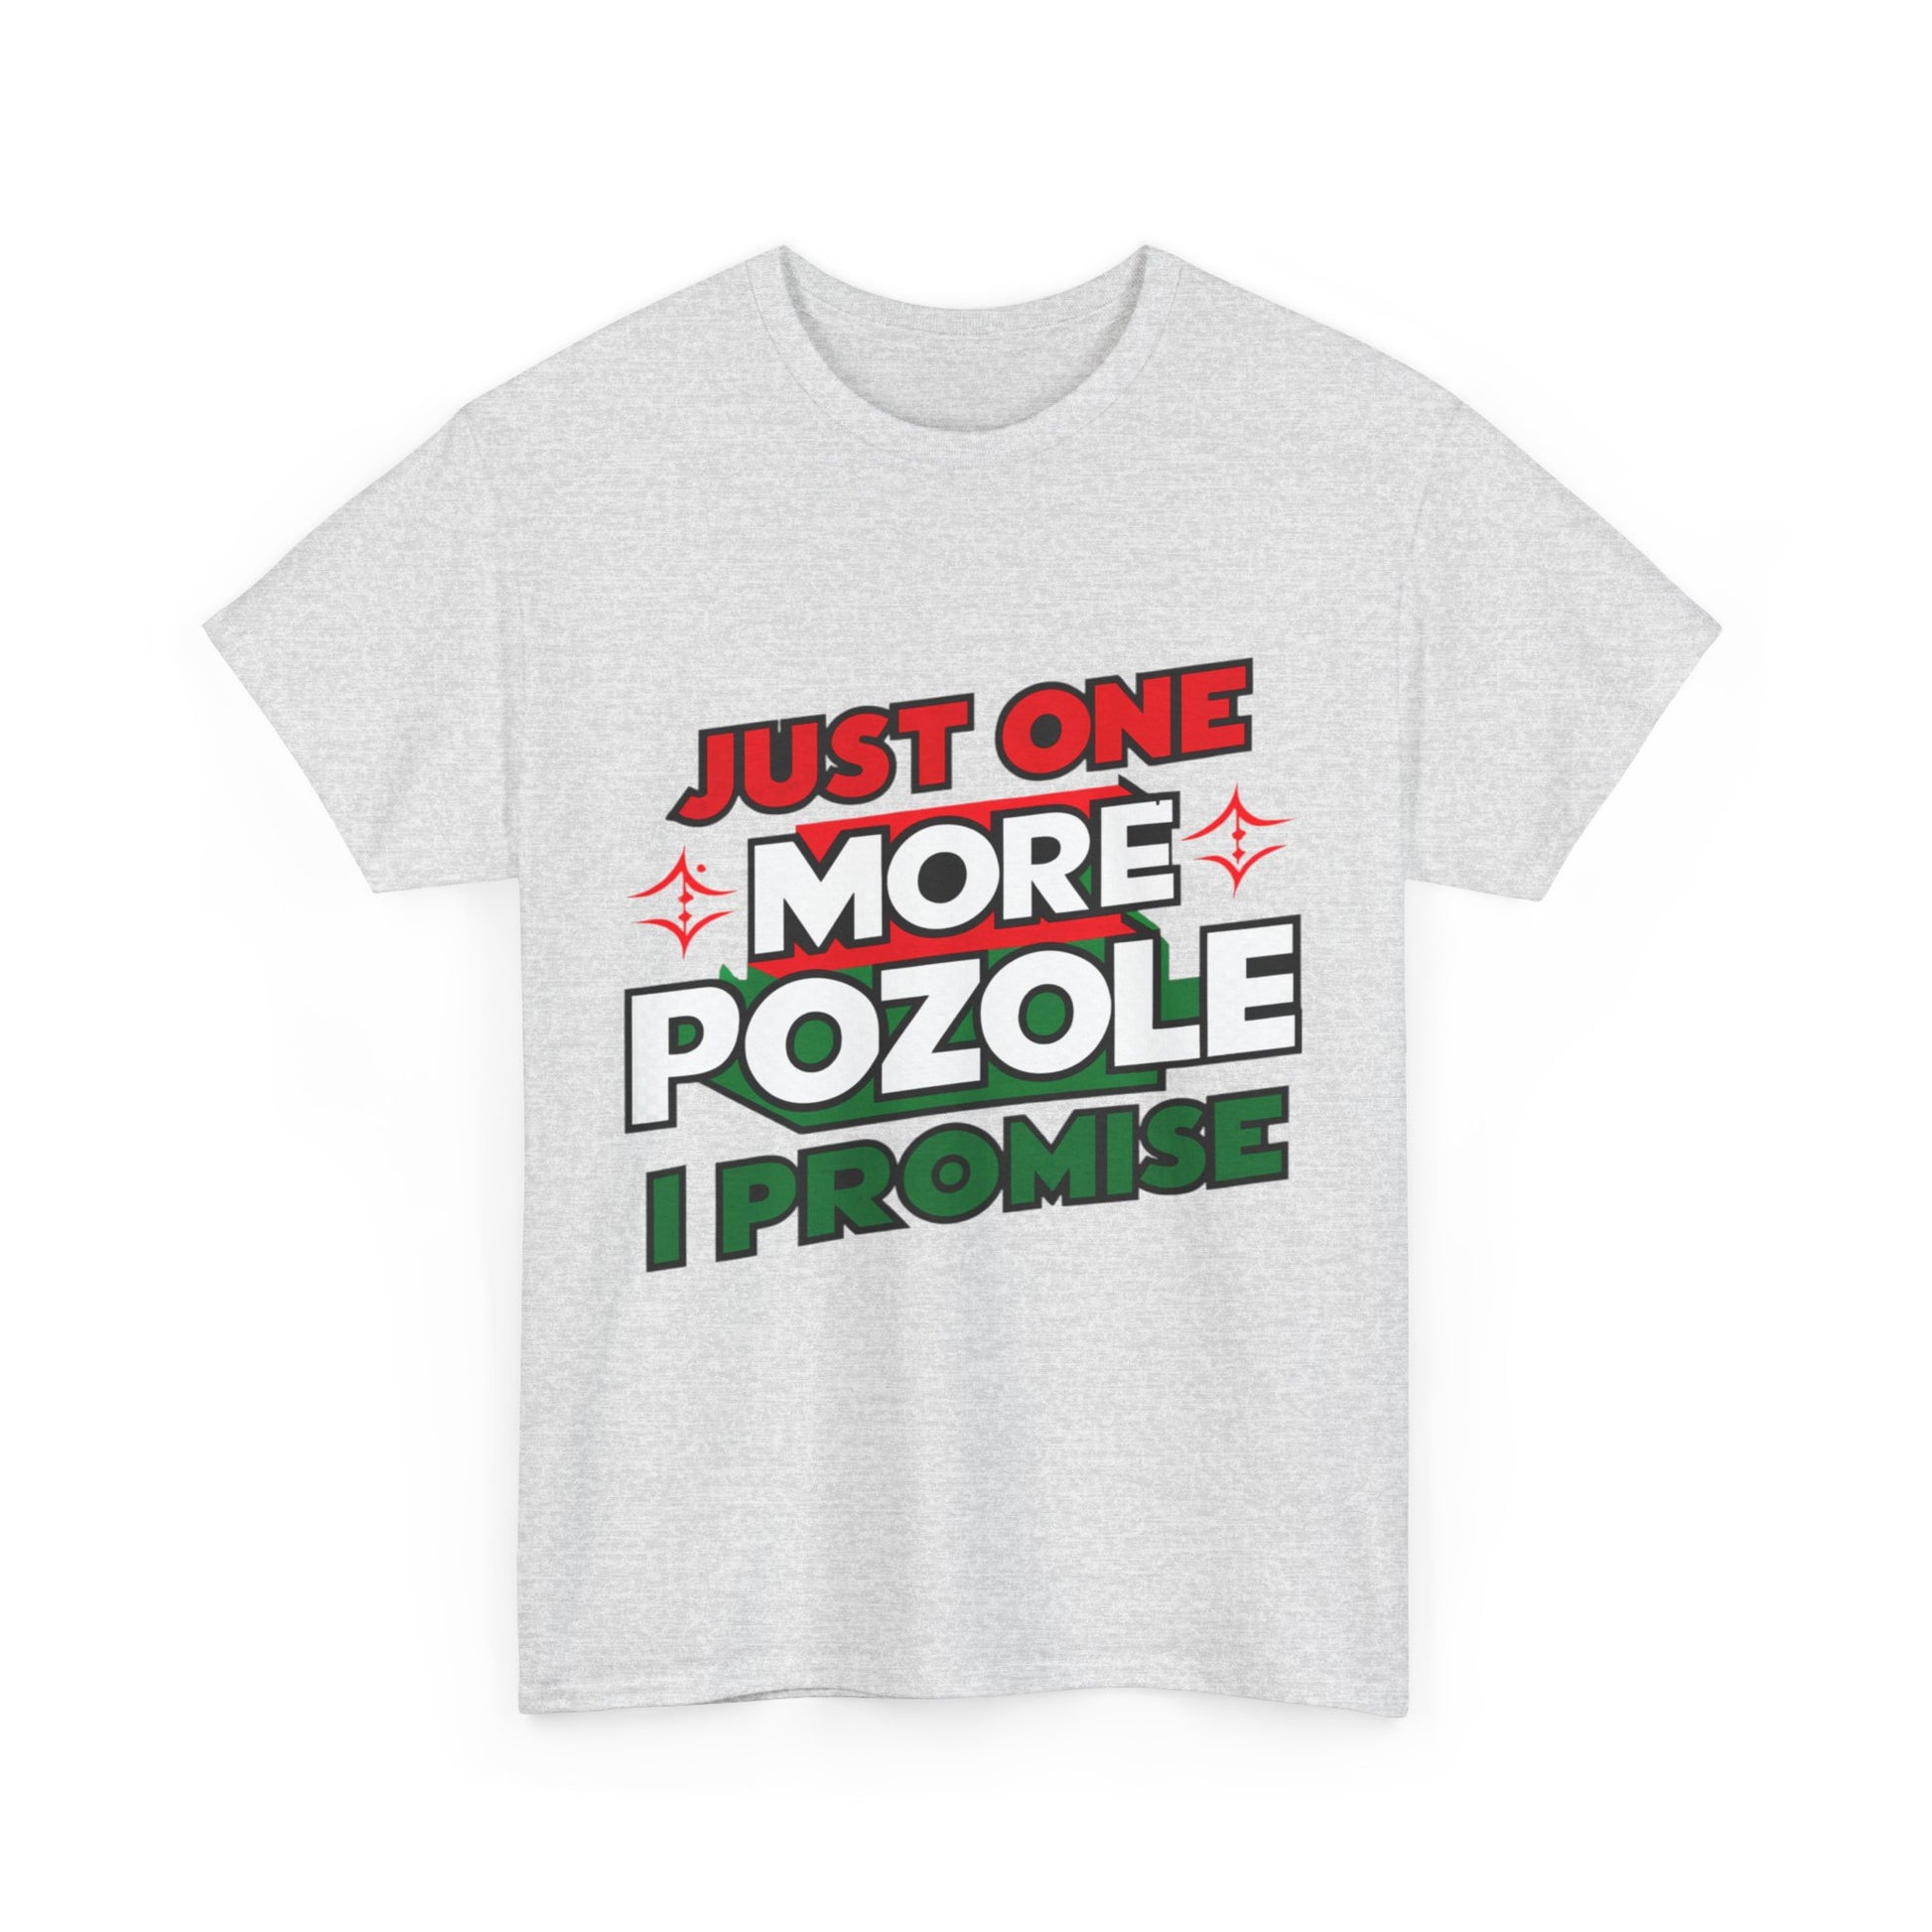 Just One More Pozole I Promise Mexican Food Graphic Unisex Heavy Cotton Tee Cotton Funny Humorous Graphic Soft Premium Unisex Men Women Ash T-shirt Birthday Gift-51